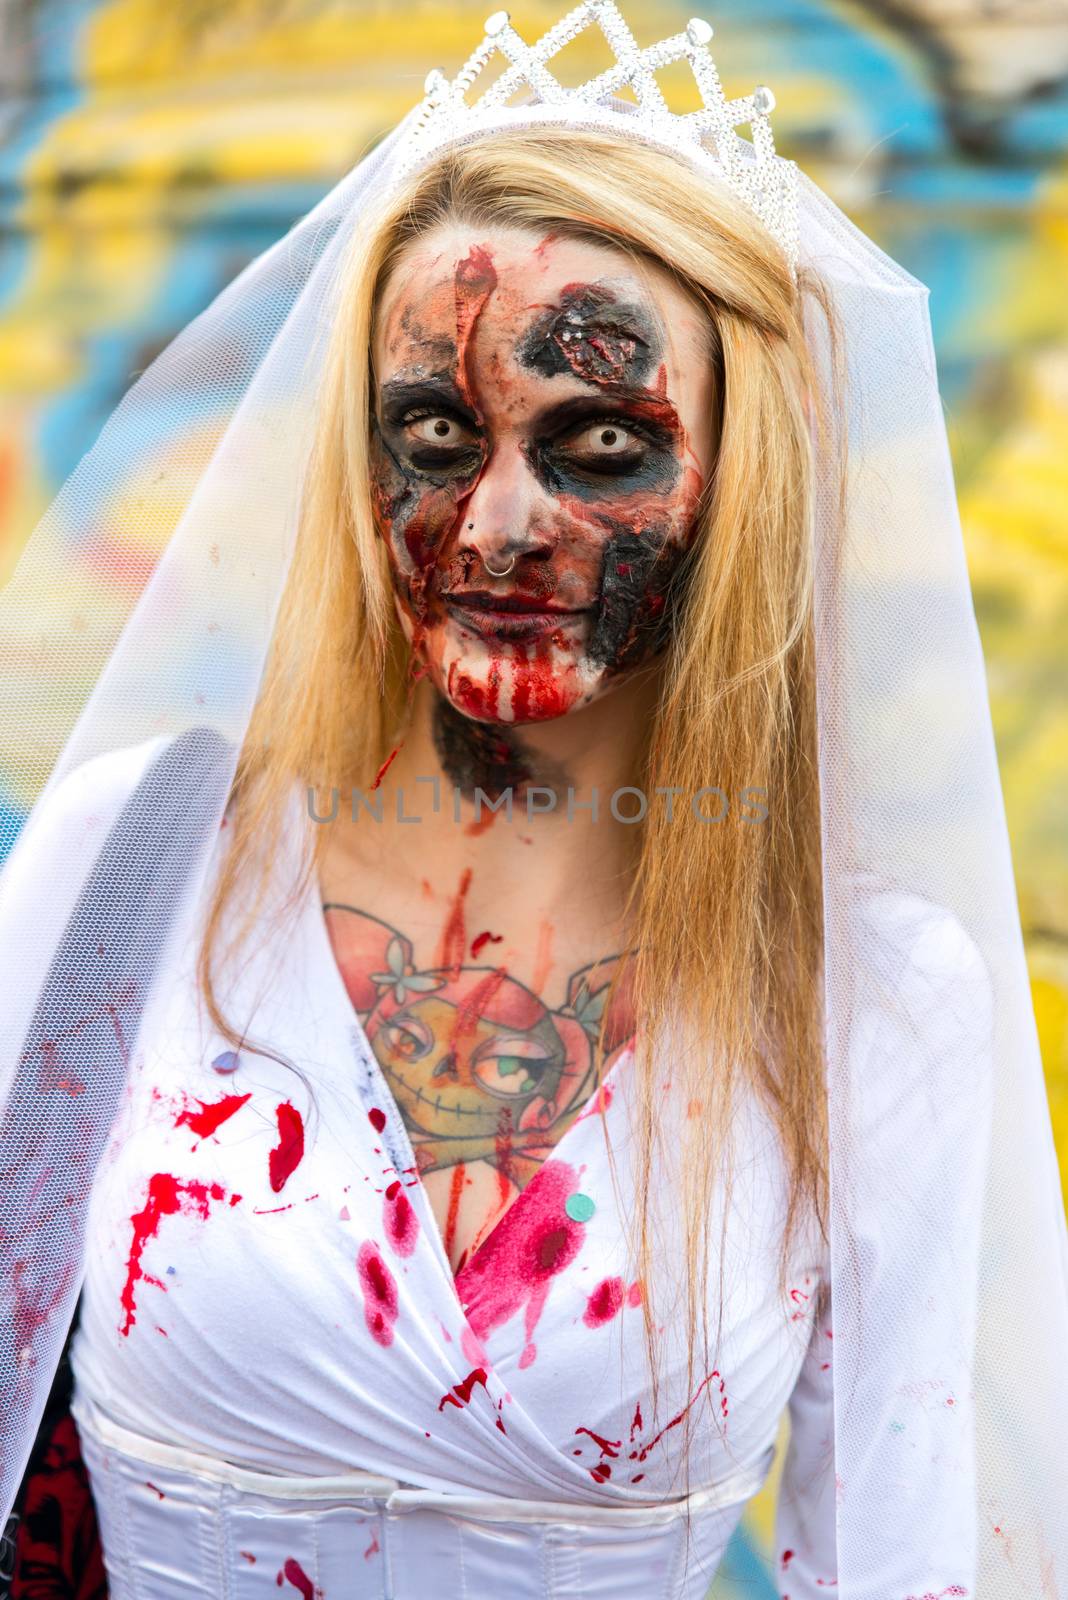 FRANCE, Paris: A participant poses during 8th Zombie Walk held in Paris on October 3, 2015.